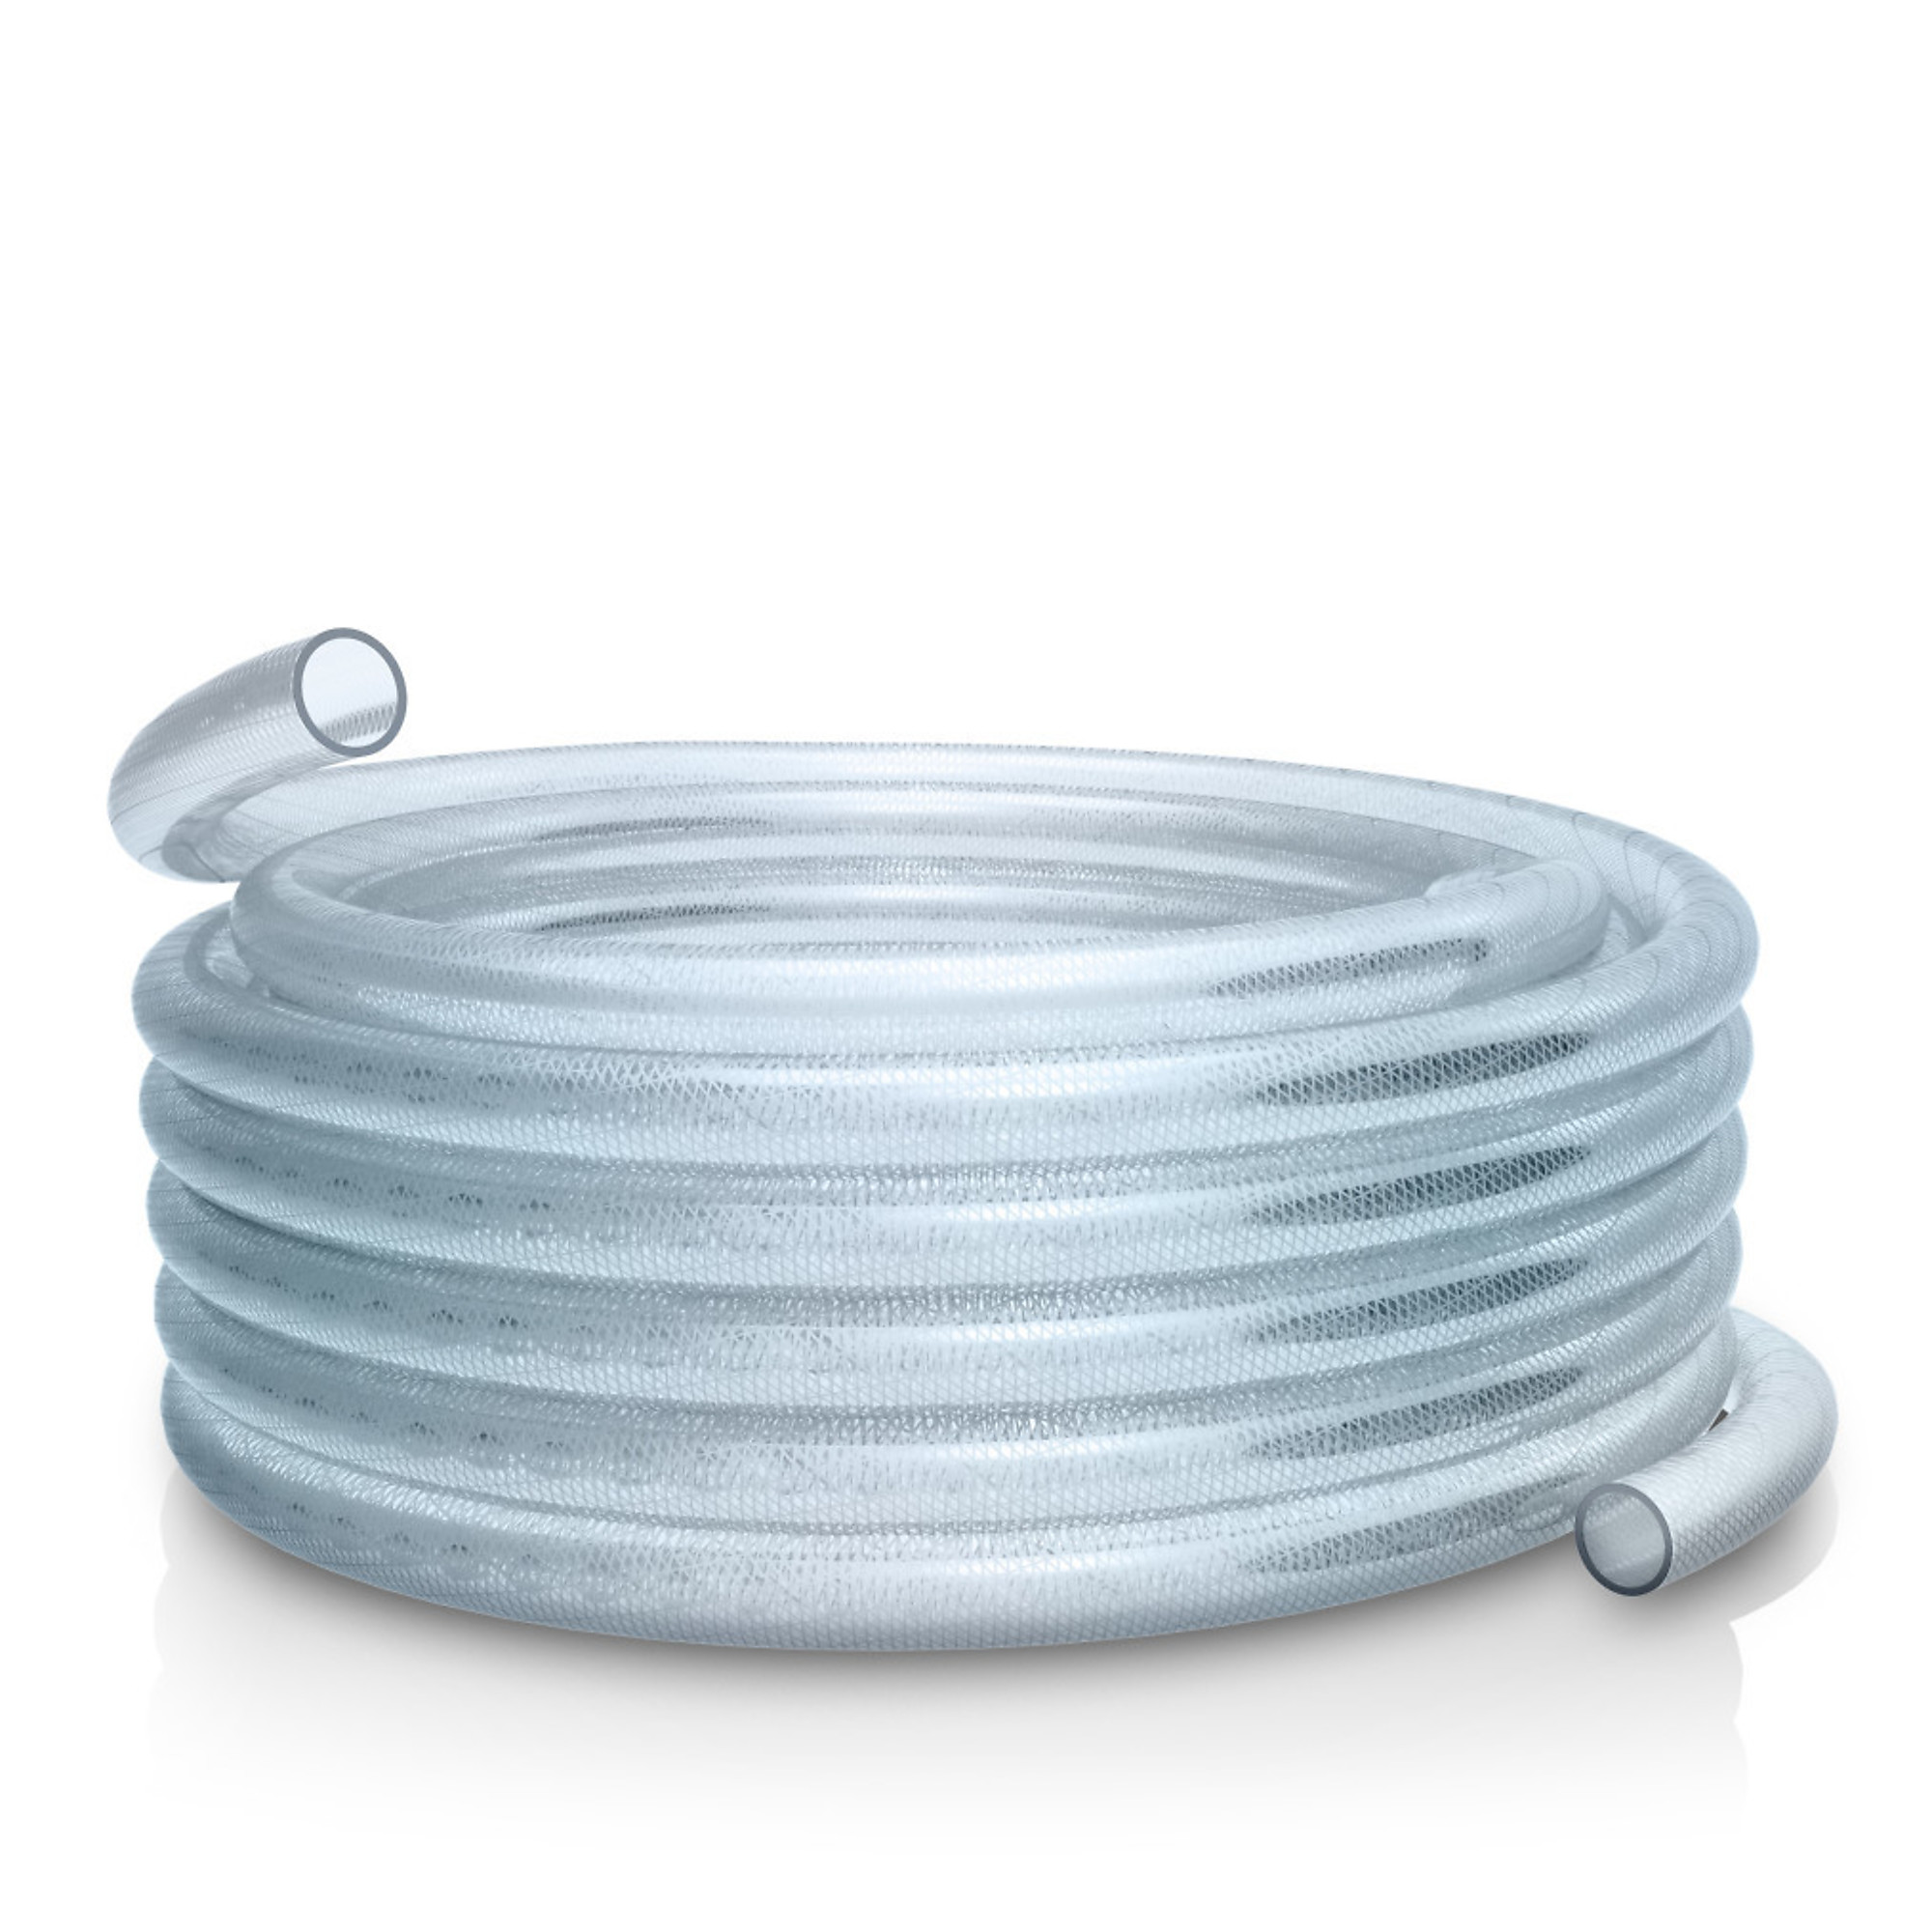 Alpine Corporation, 5/8Inch I.D. Clear Braided Tubing x 100ft., Model VR058